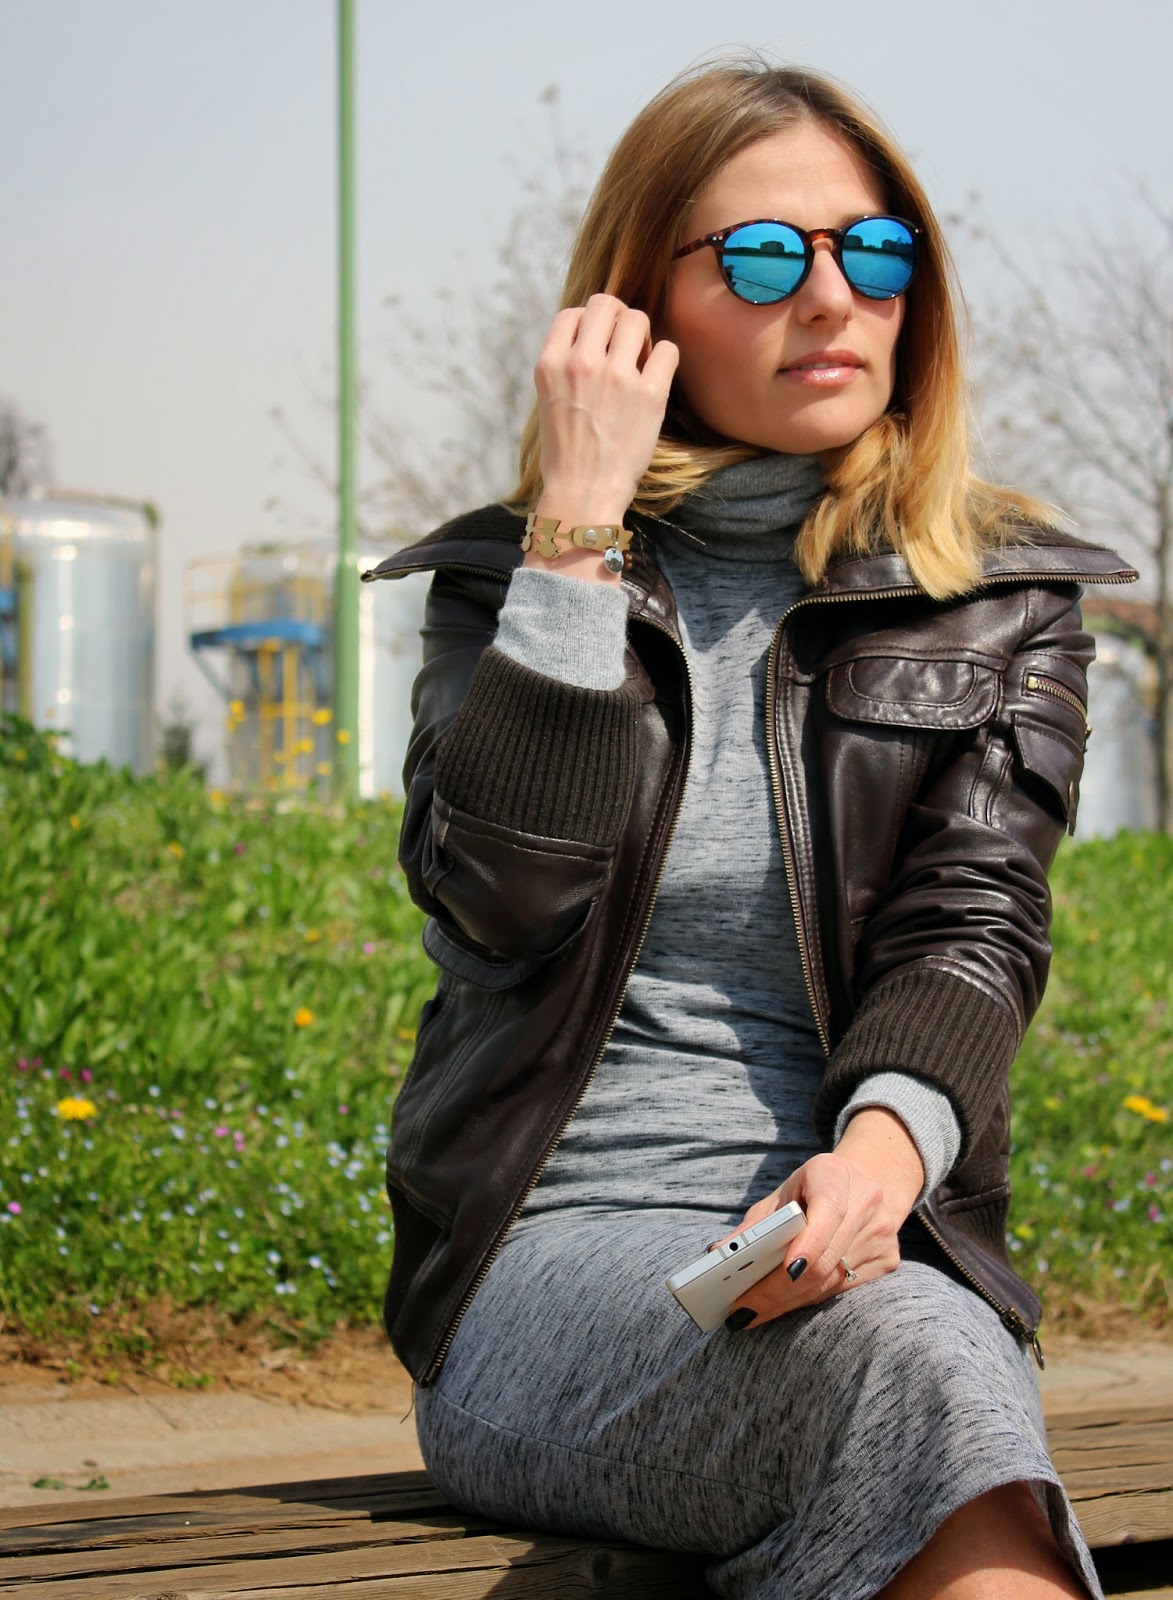 Eniwhere Fashion - Gray dress and leather jacket